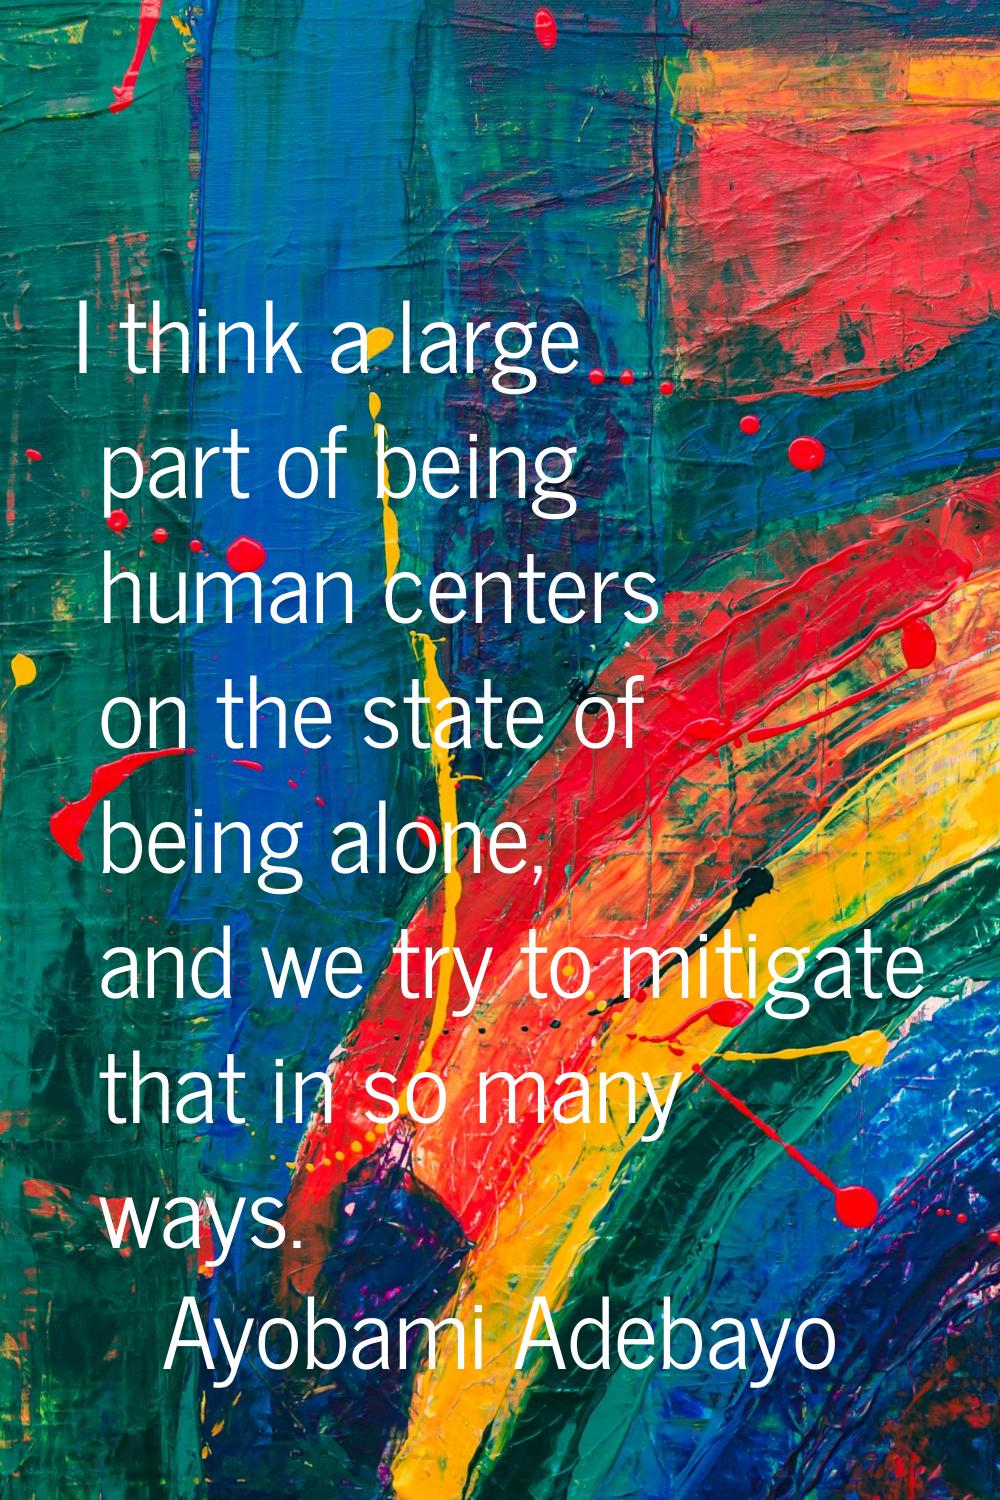 I think a large part of being human centers on the state of being alone, and we try to mitigate tha